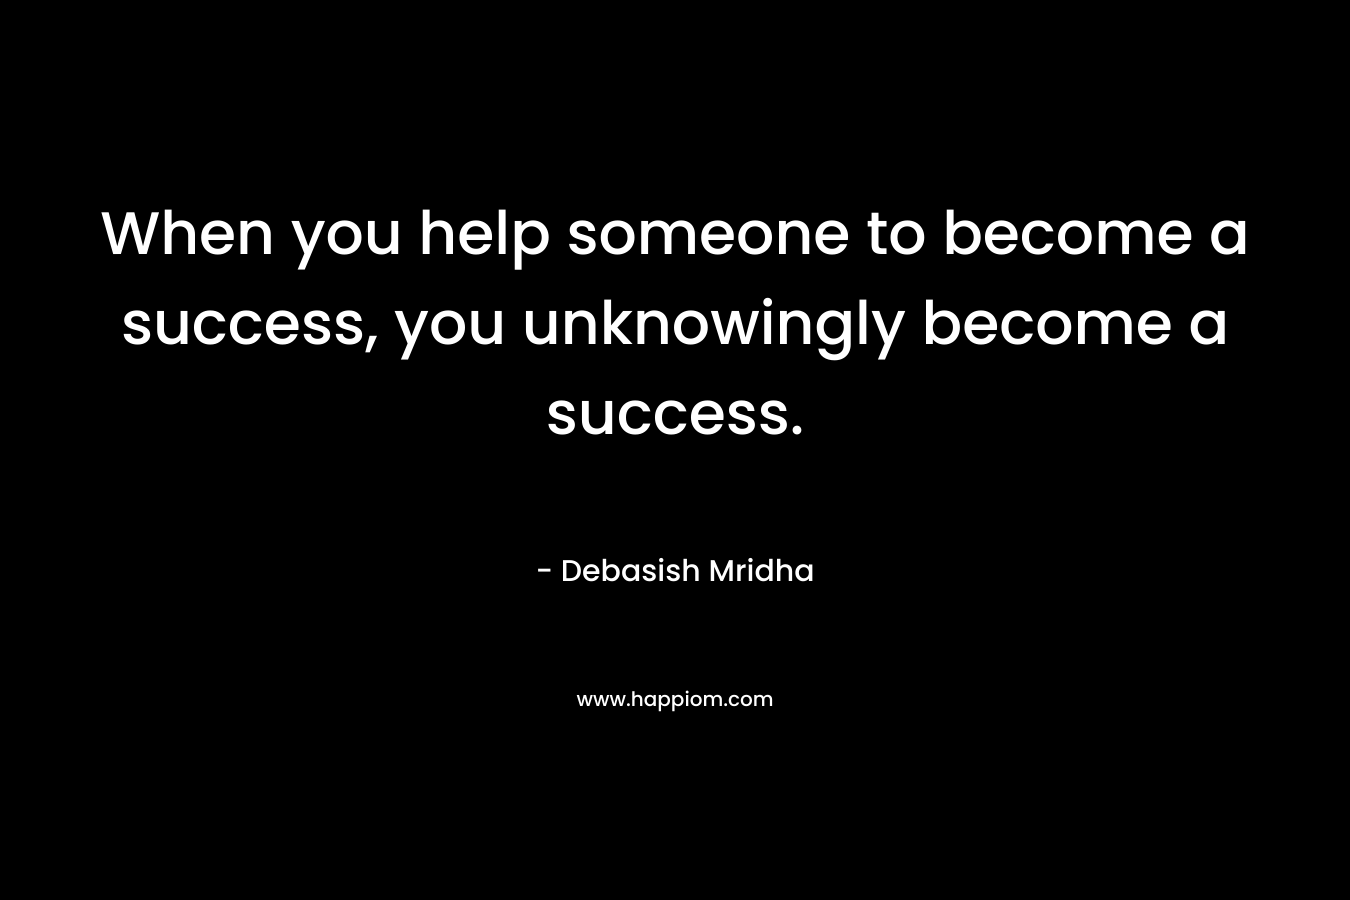 When you help someone to become a success, you unknowingly become a success.